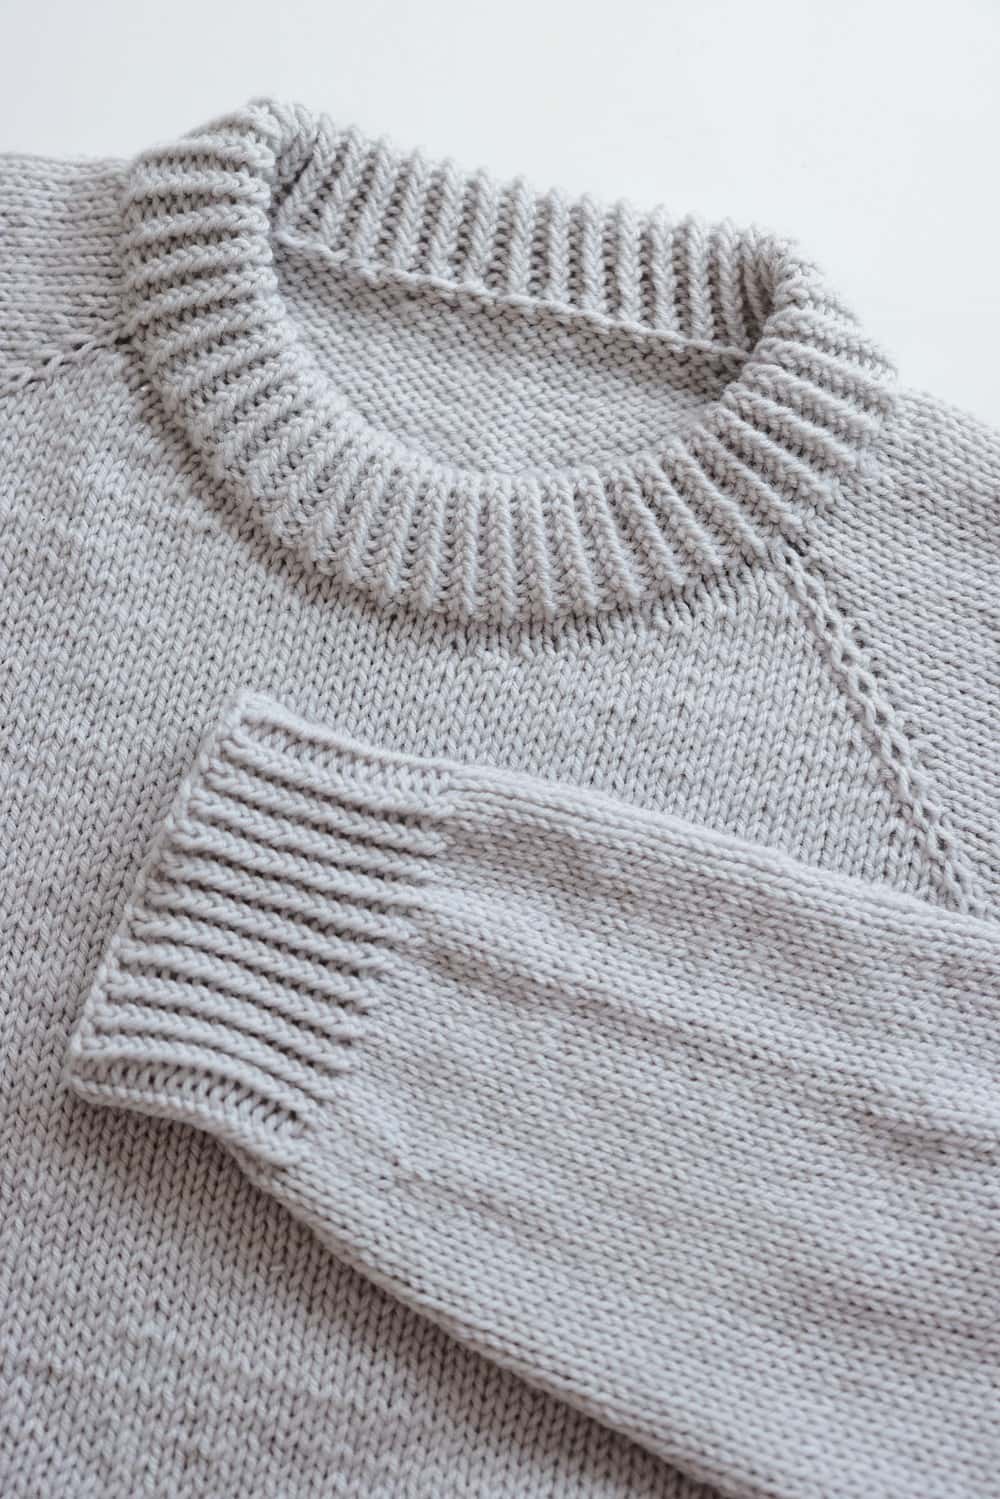 Basic Sweater Knitting Pattern, Pullover Darling Jadore Essential Sweater